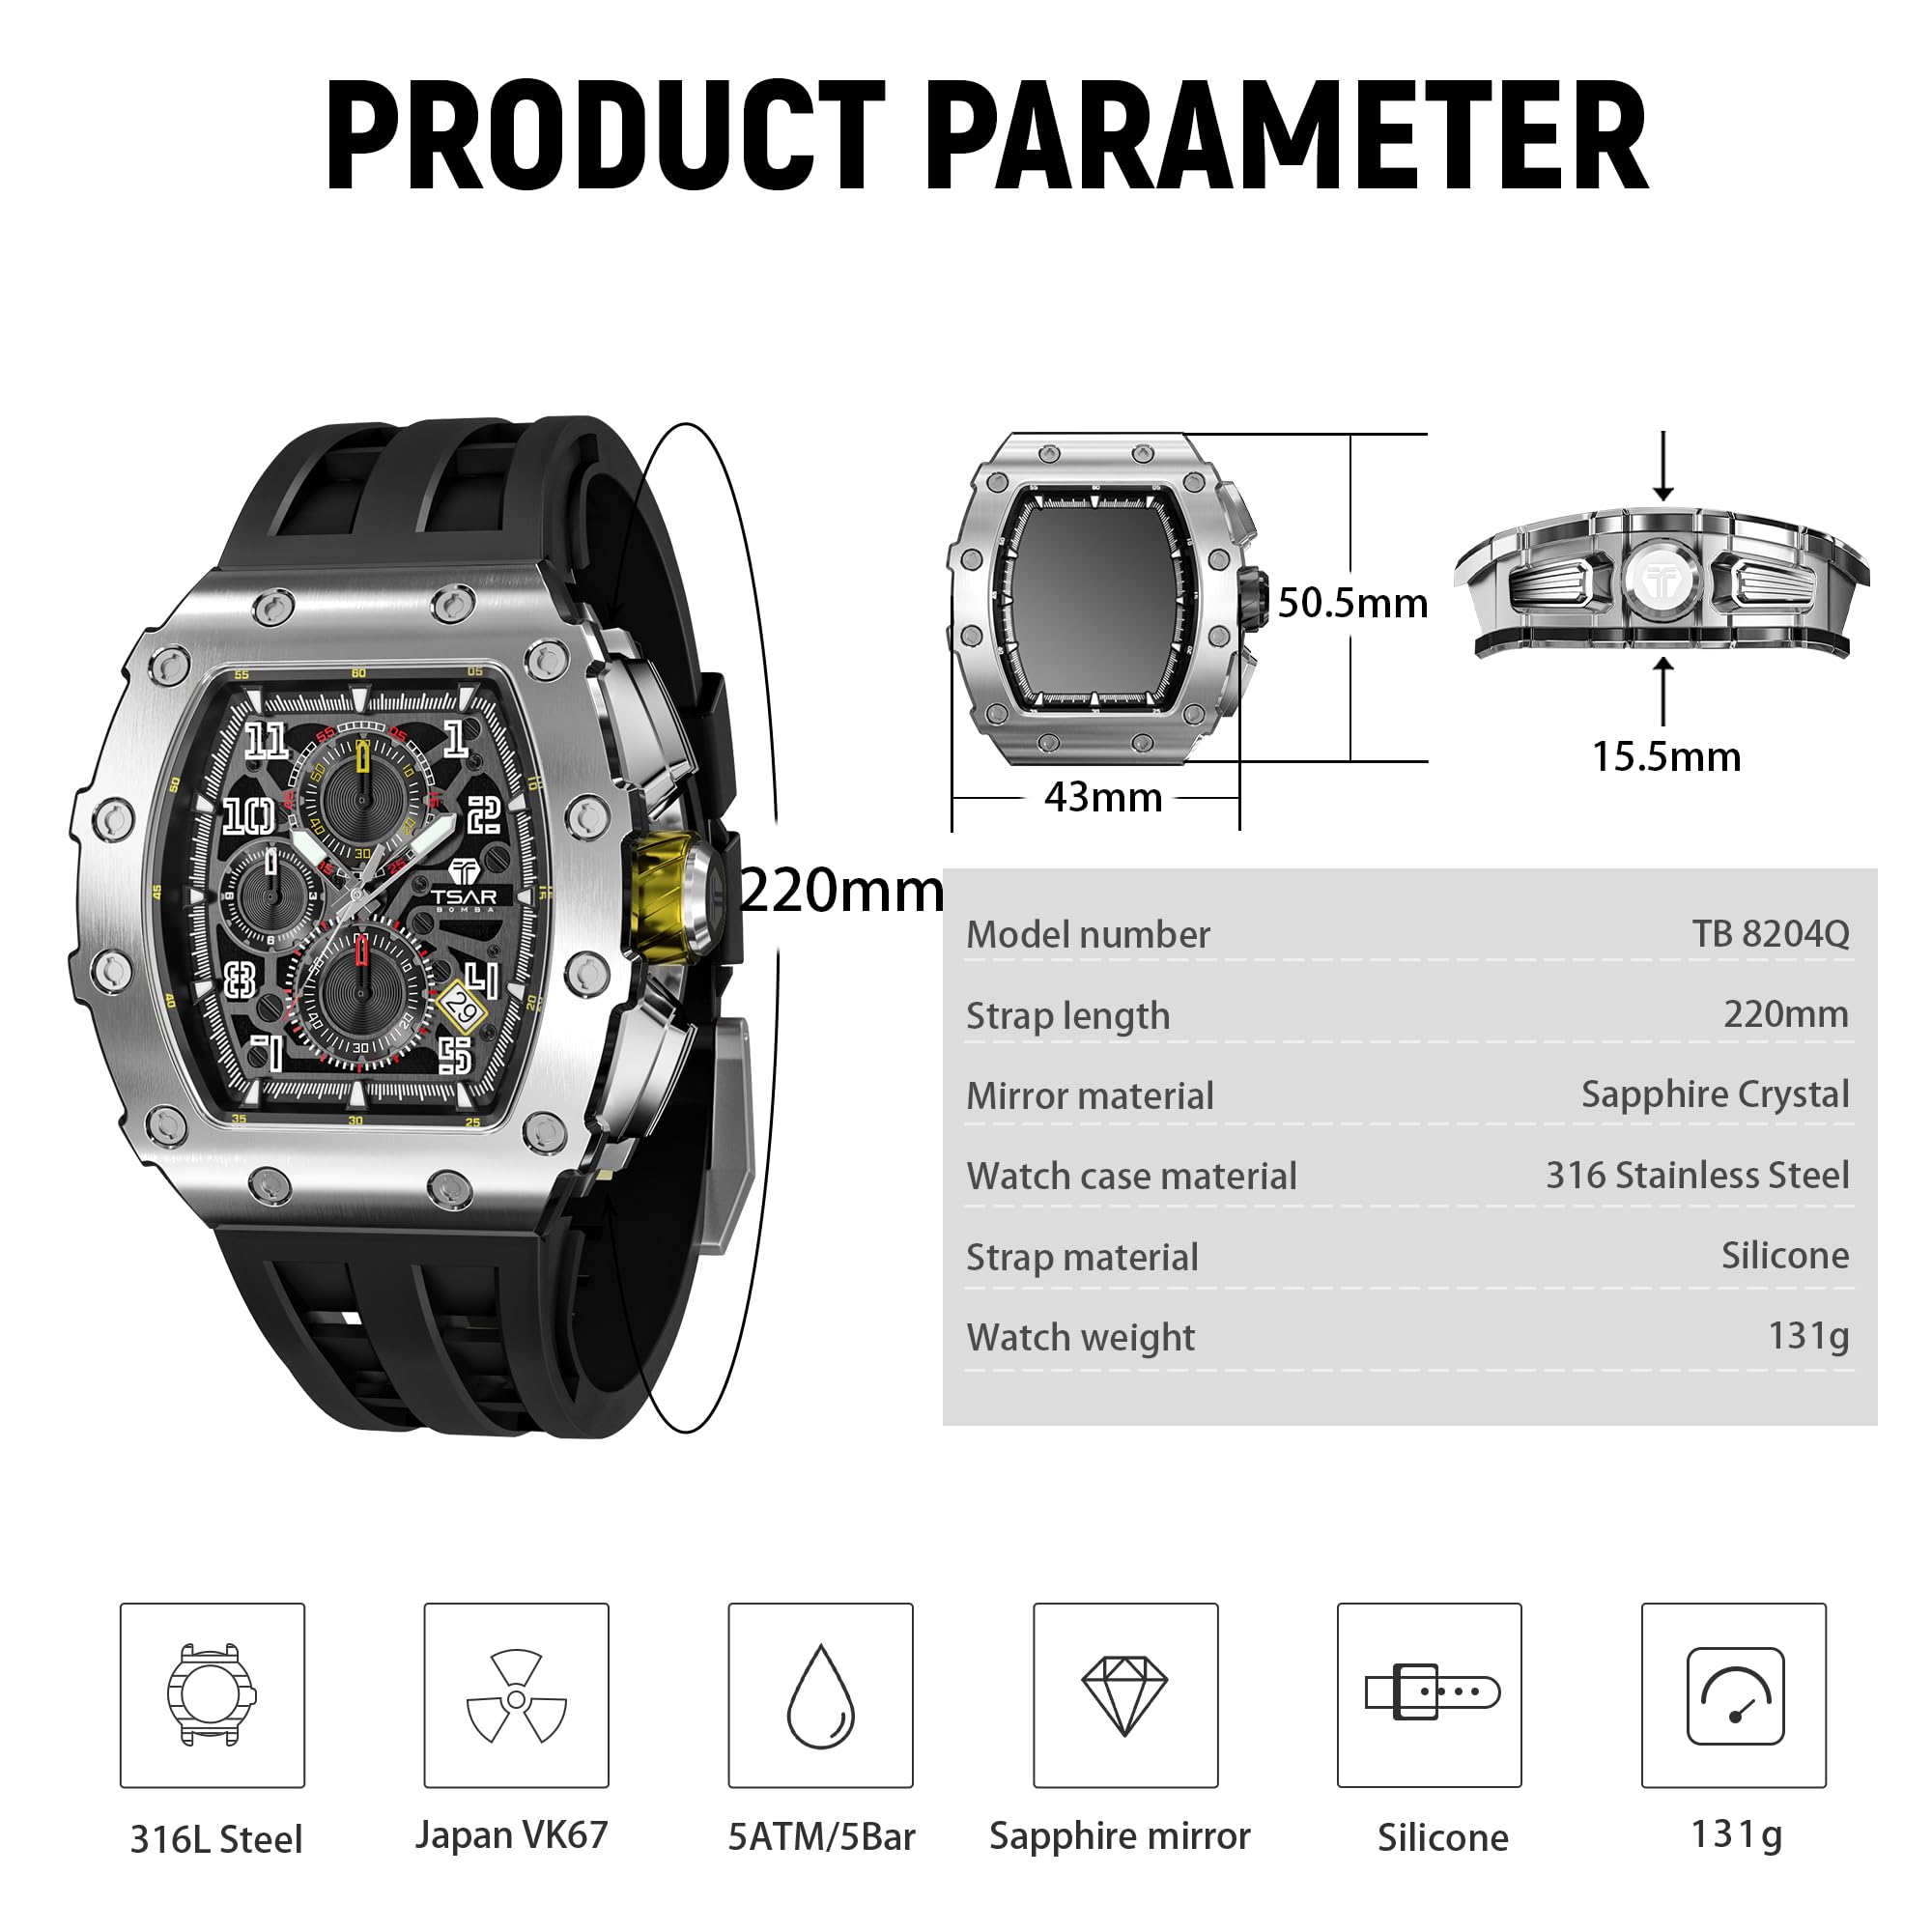 TSAR BOMBA Mens Luxury Watch Watches for Men 50M Waterproof Japanese Quartz Movement Tonneau Stainless Steel Case Sapphire Glass with Chronograph Date Function Cool Unique Fashion Gift Watch